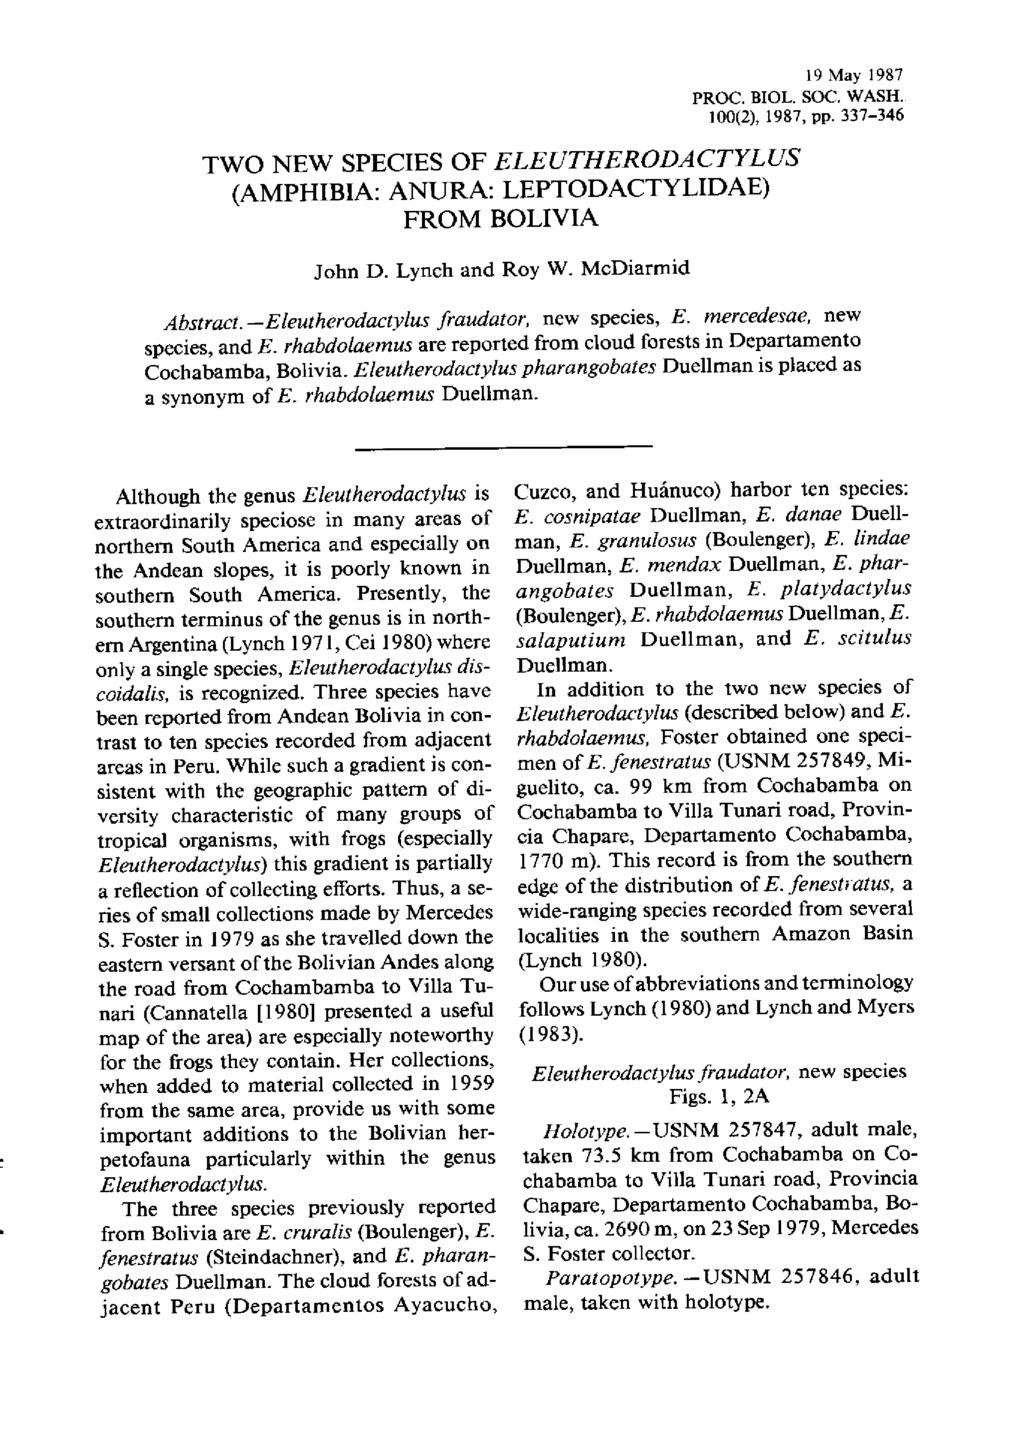 19 May 1987 PROC. BIOL. SOC. WASH. 100(2), 1987, pp. 337-346 TWO NEW SPECIES OF ELEUTHERODACTYLUS (AMPHIBIA: ANURA: LEPTODACTYLIDAE) FROM BOLIVIA John D. Lynch and Roy W. McDiarmid Abstract.